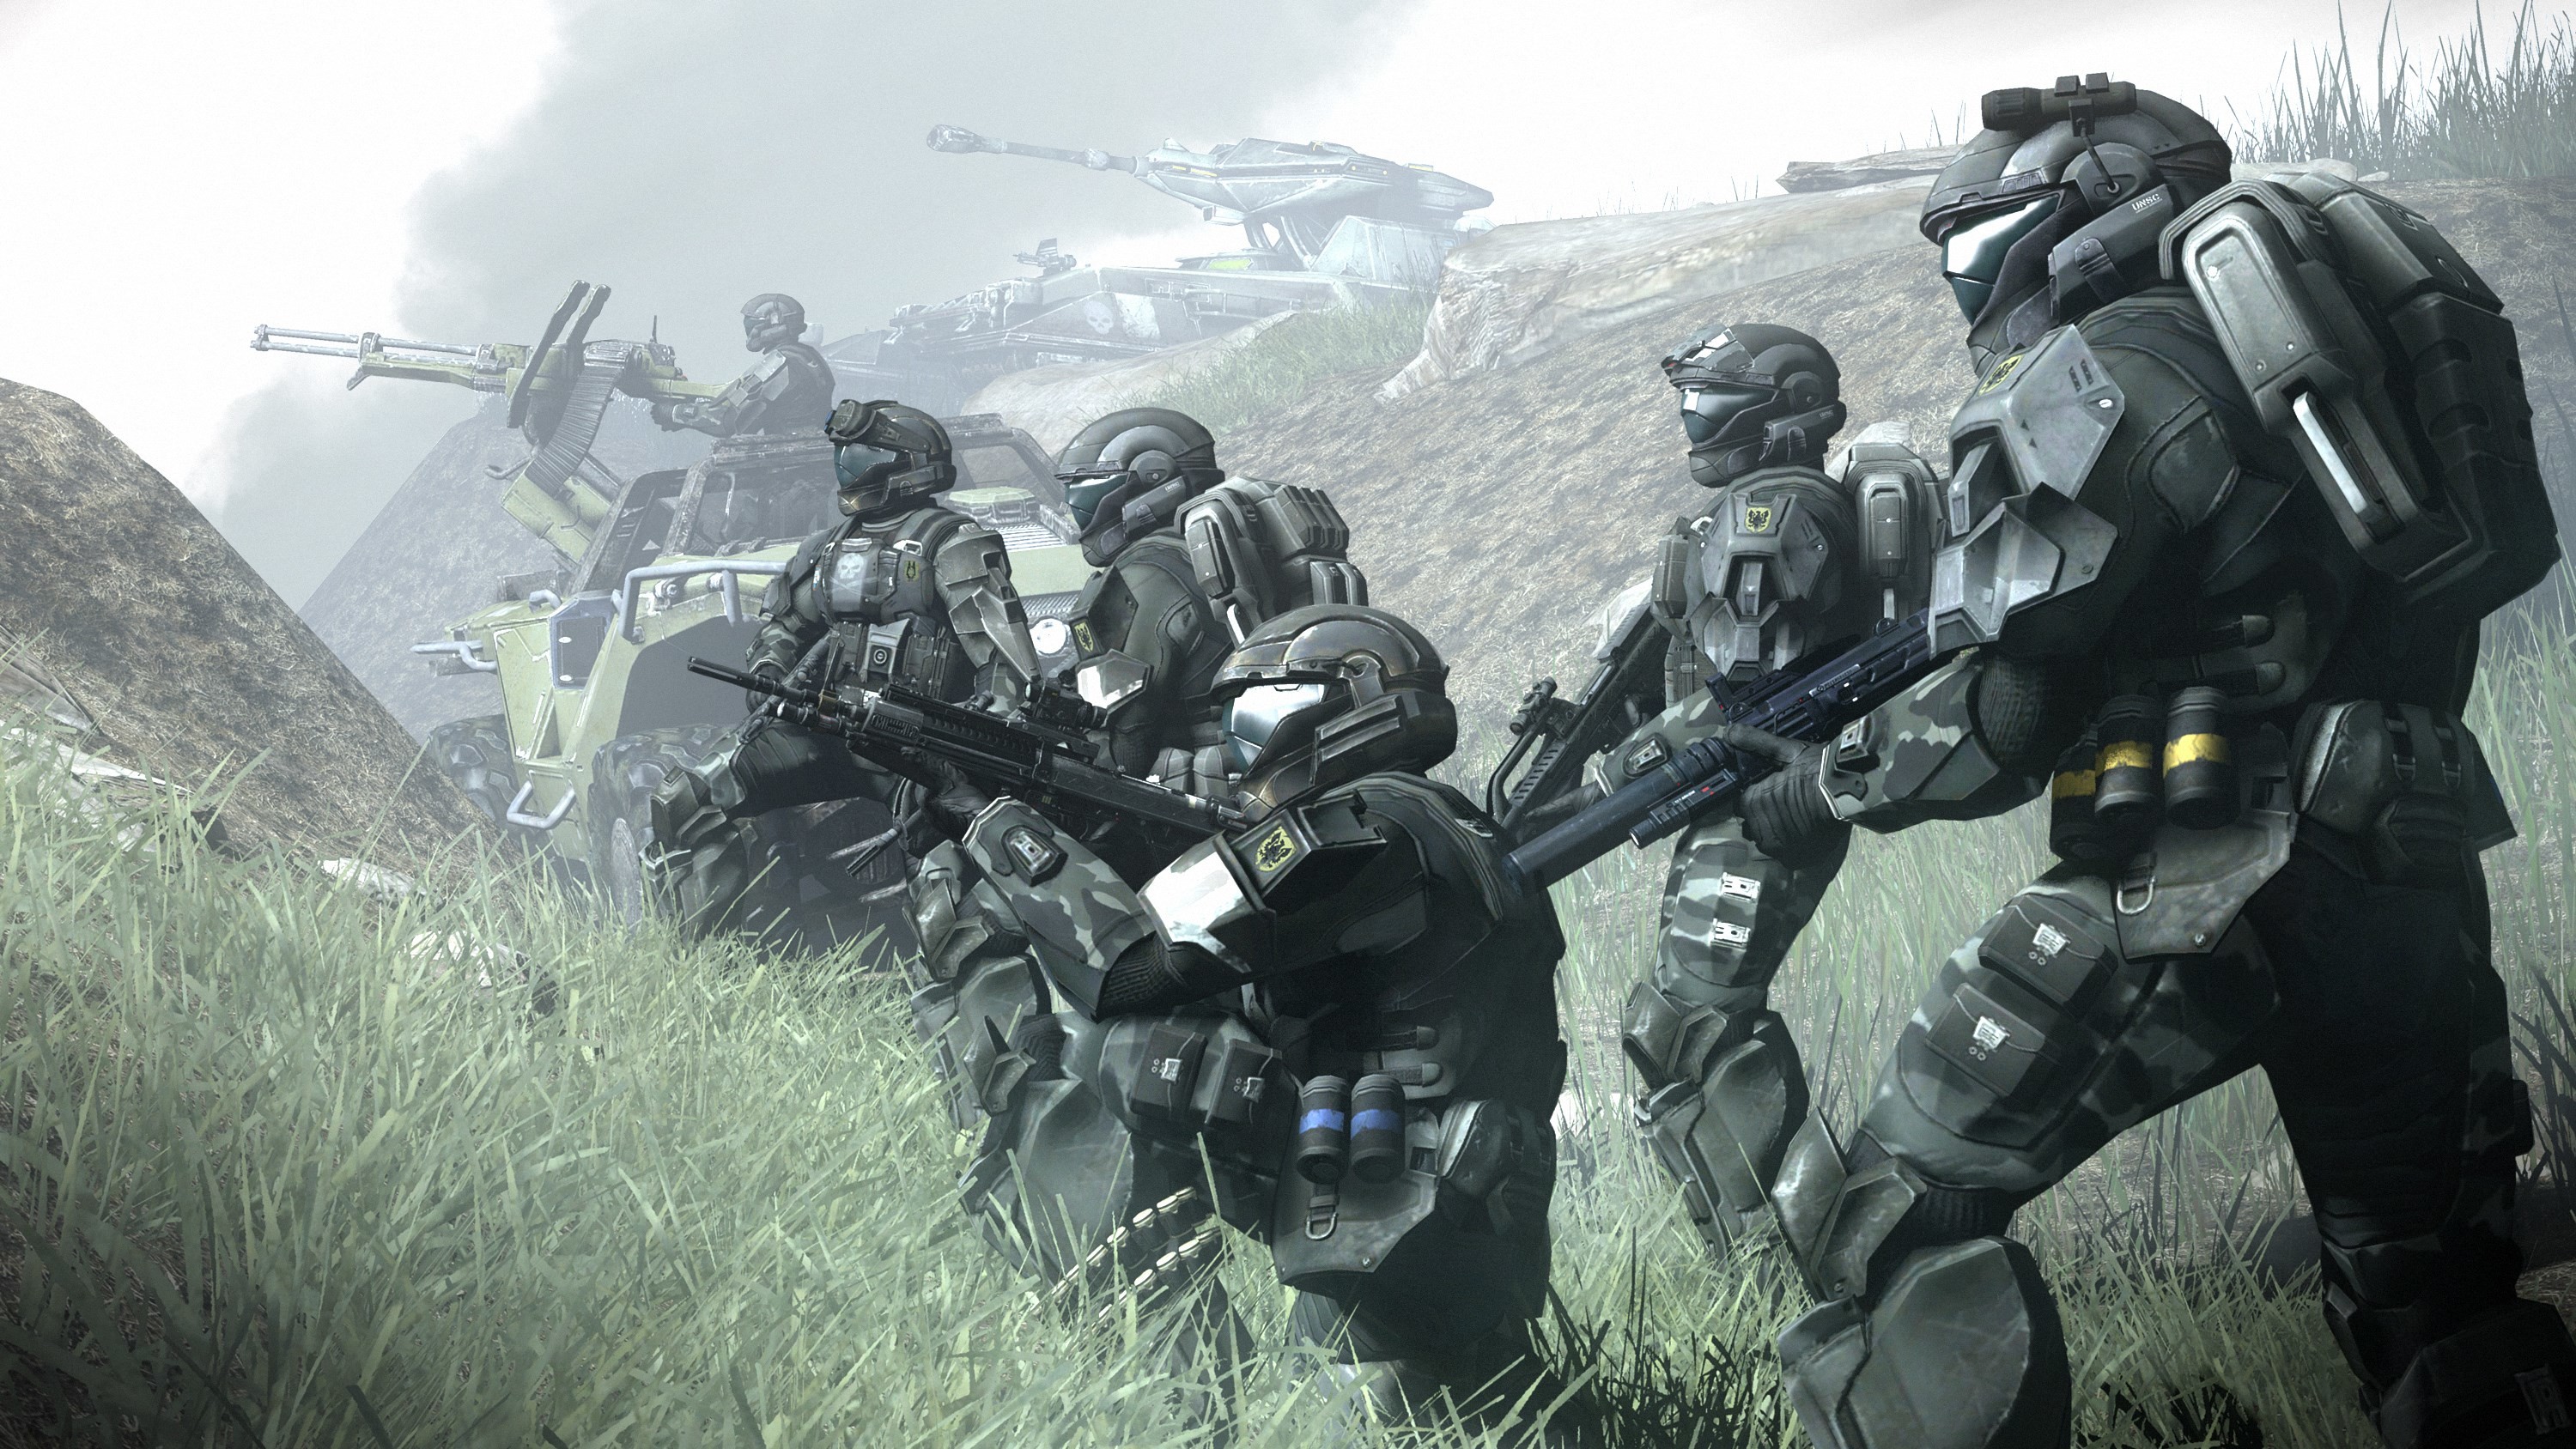 3000x1688 ... 3840x2160 computer wallpaper for halo 3 odst 3840x2160 1069 kb ...